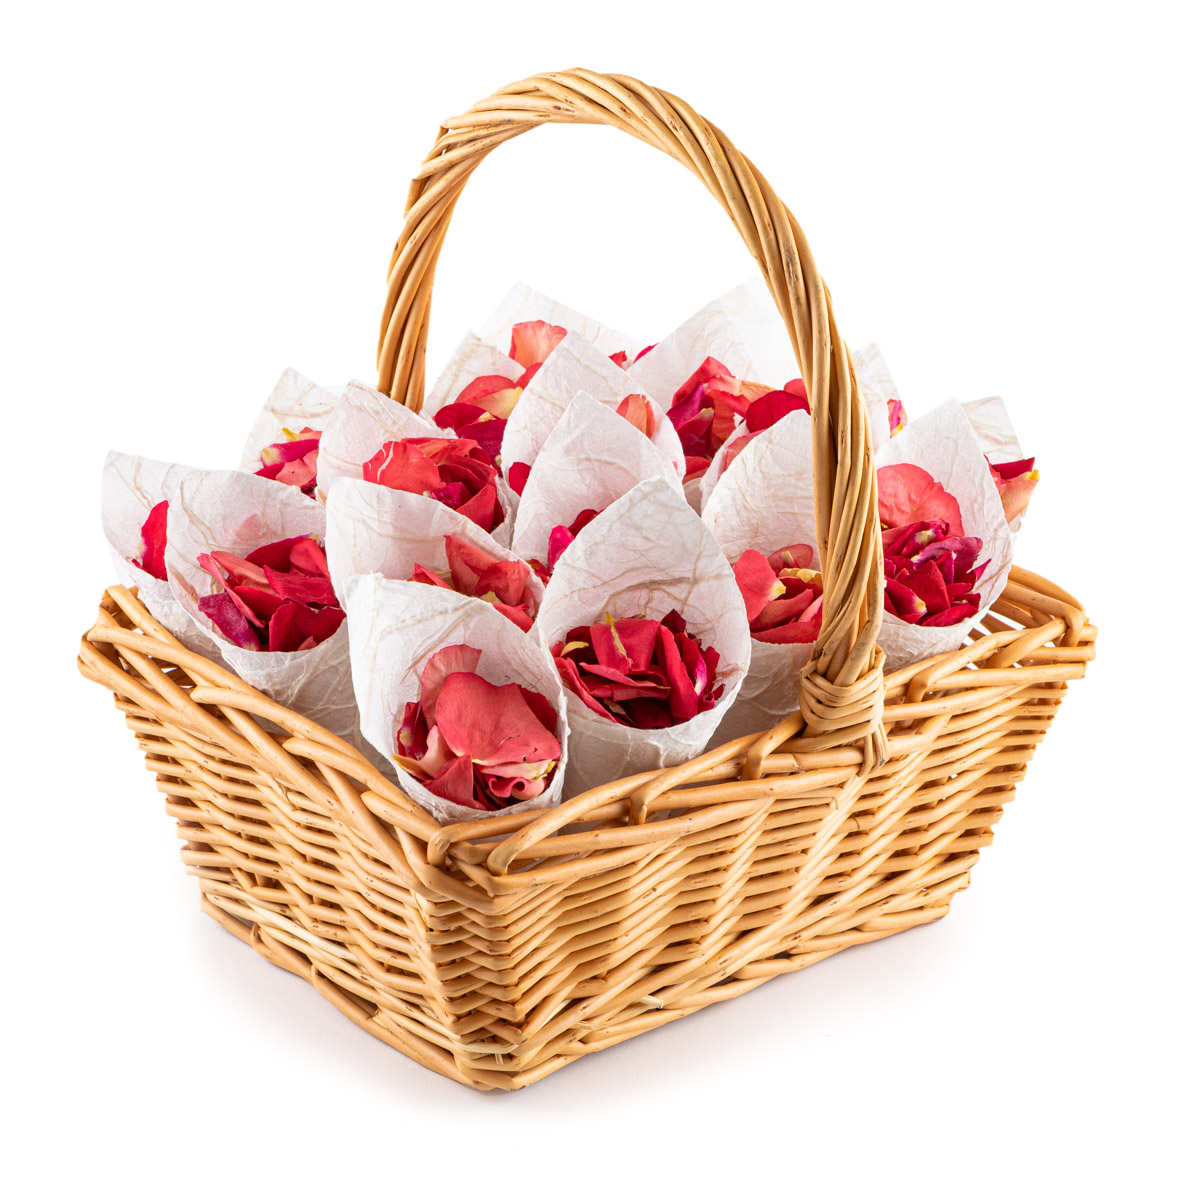 A rectangular basket filled with 20 confetti cones and red and pink rose petal confetti